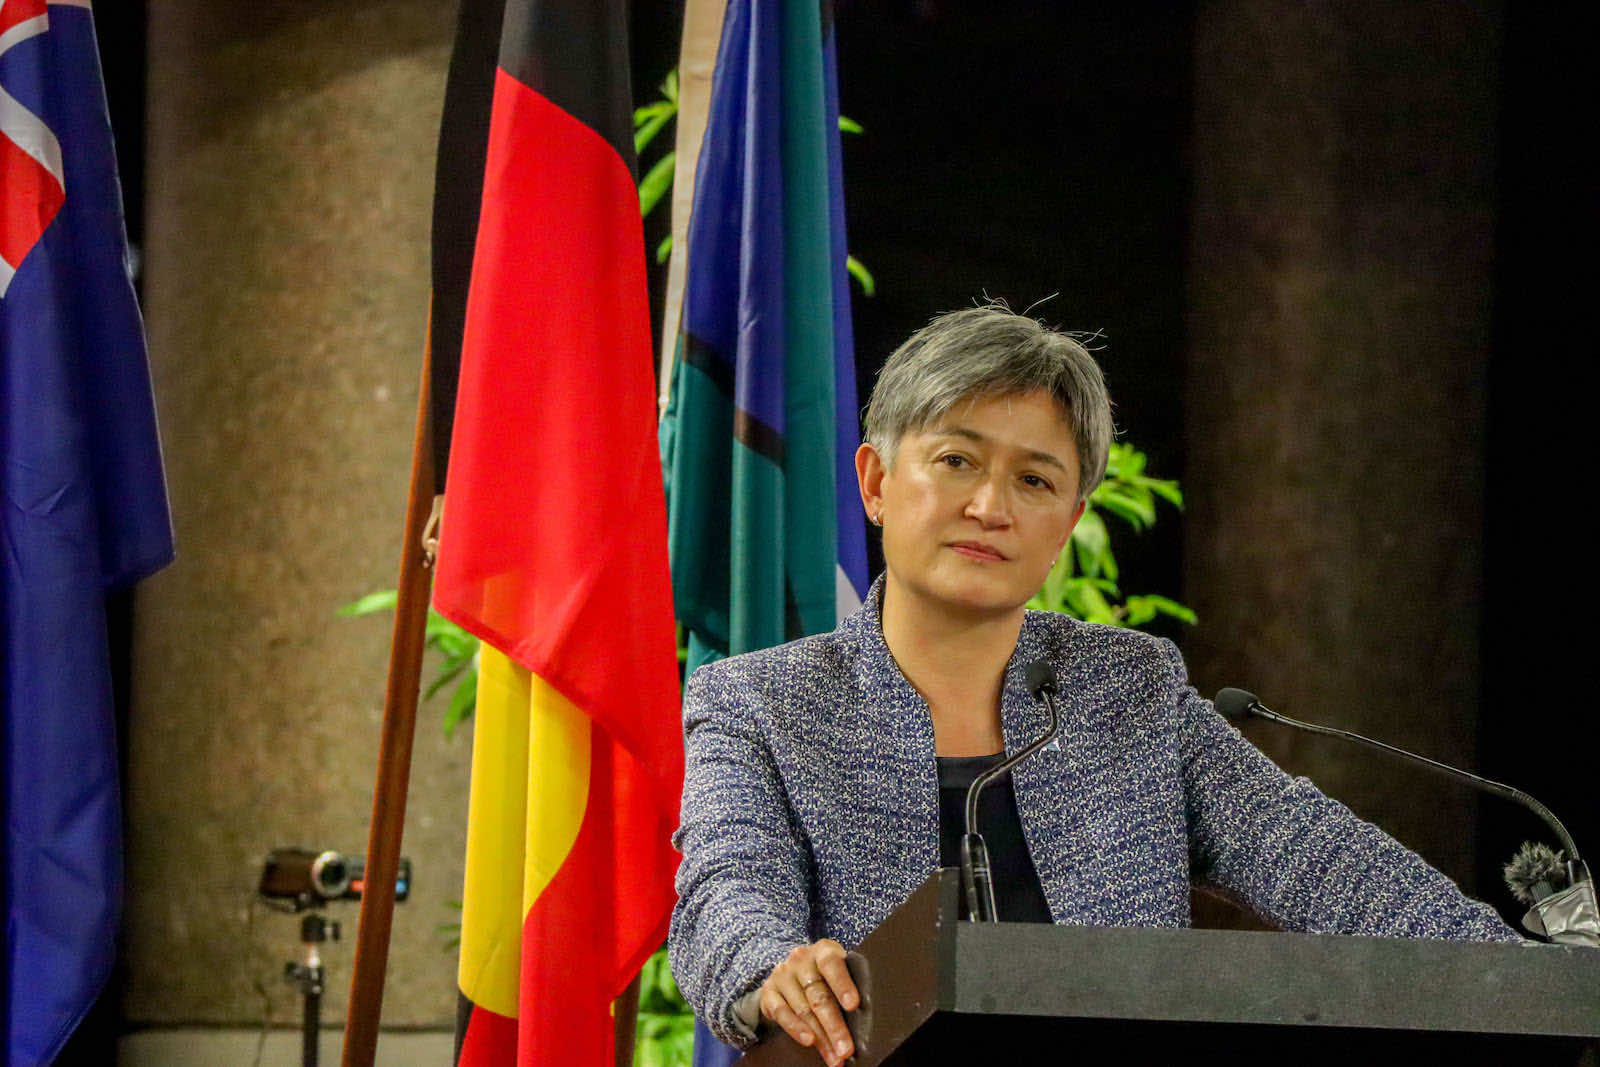 Foreign Minister Penny Wong gives a speech at the Pacific Island Forum on 26 May in Suva, Fiji (Pita Simpson/Getty Images)